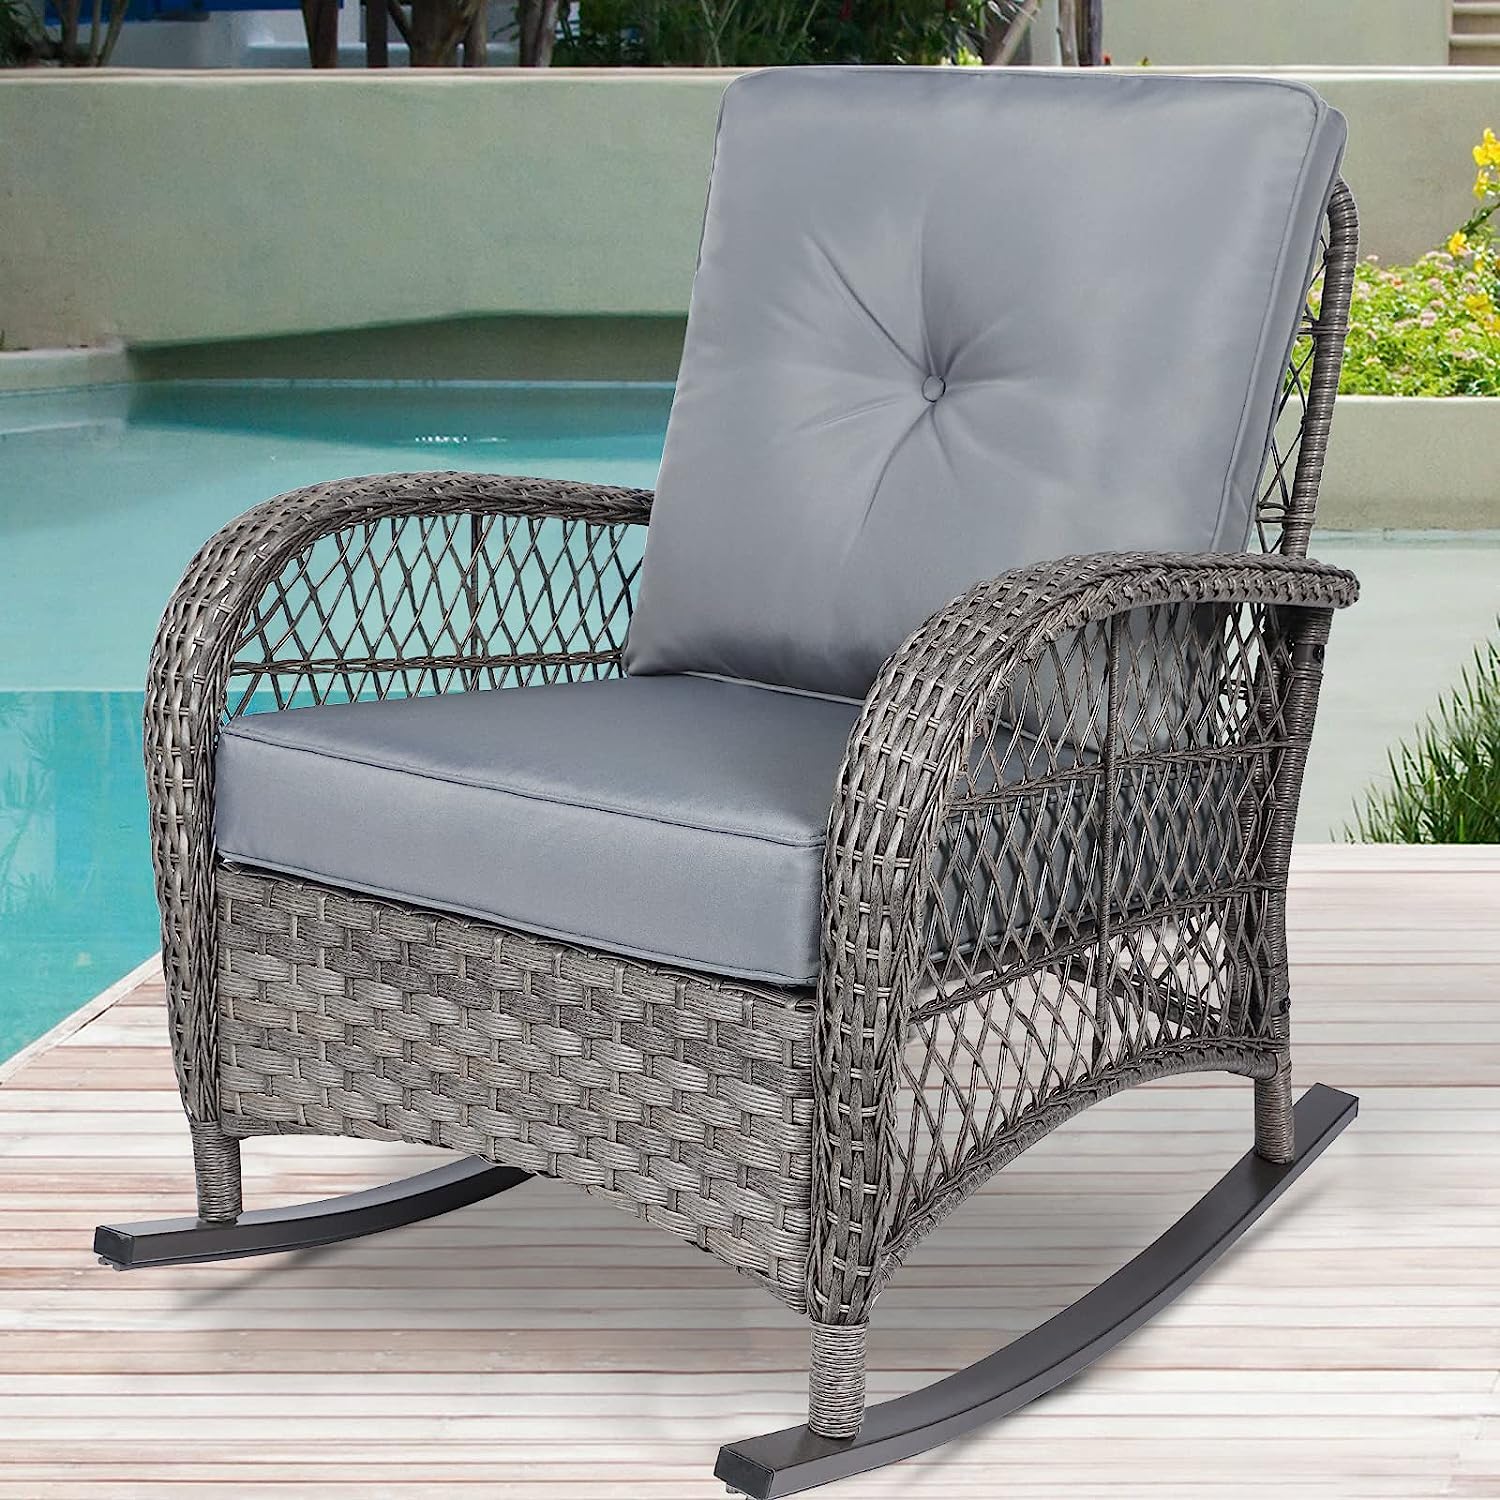 SOCIALCOMFY Outdoor Wicker Rocking Chair, Patio Rattan Rocker Chair with Steel Frame, Rocking Lawn Chair Patio Furniture, Light Brown Wicker & Grey Cushions - image 1 of 7